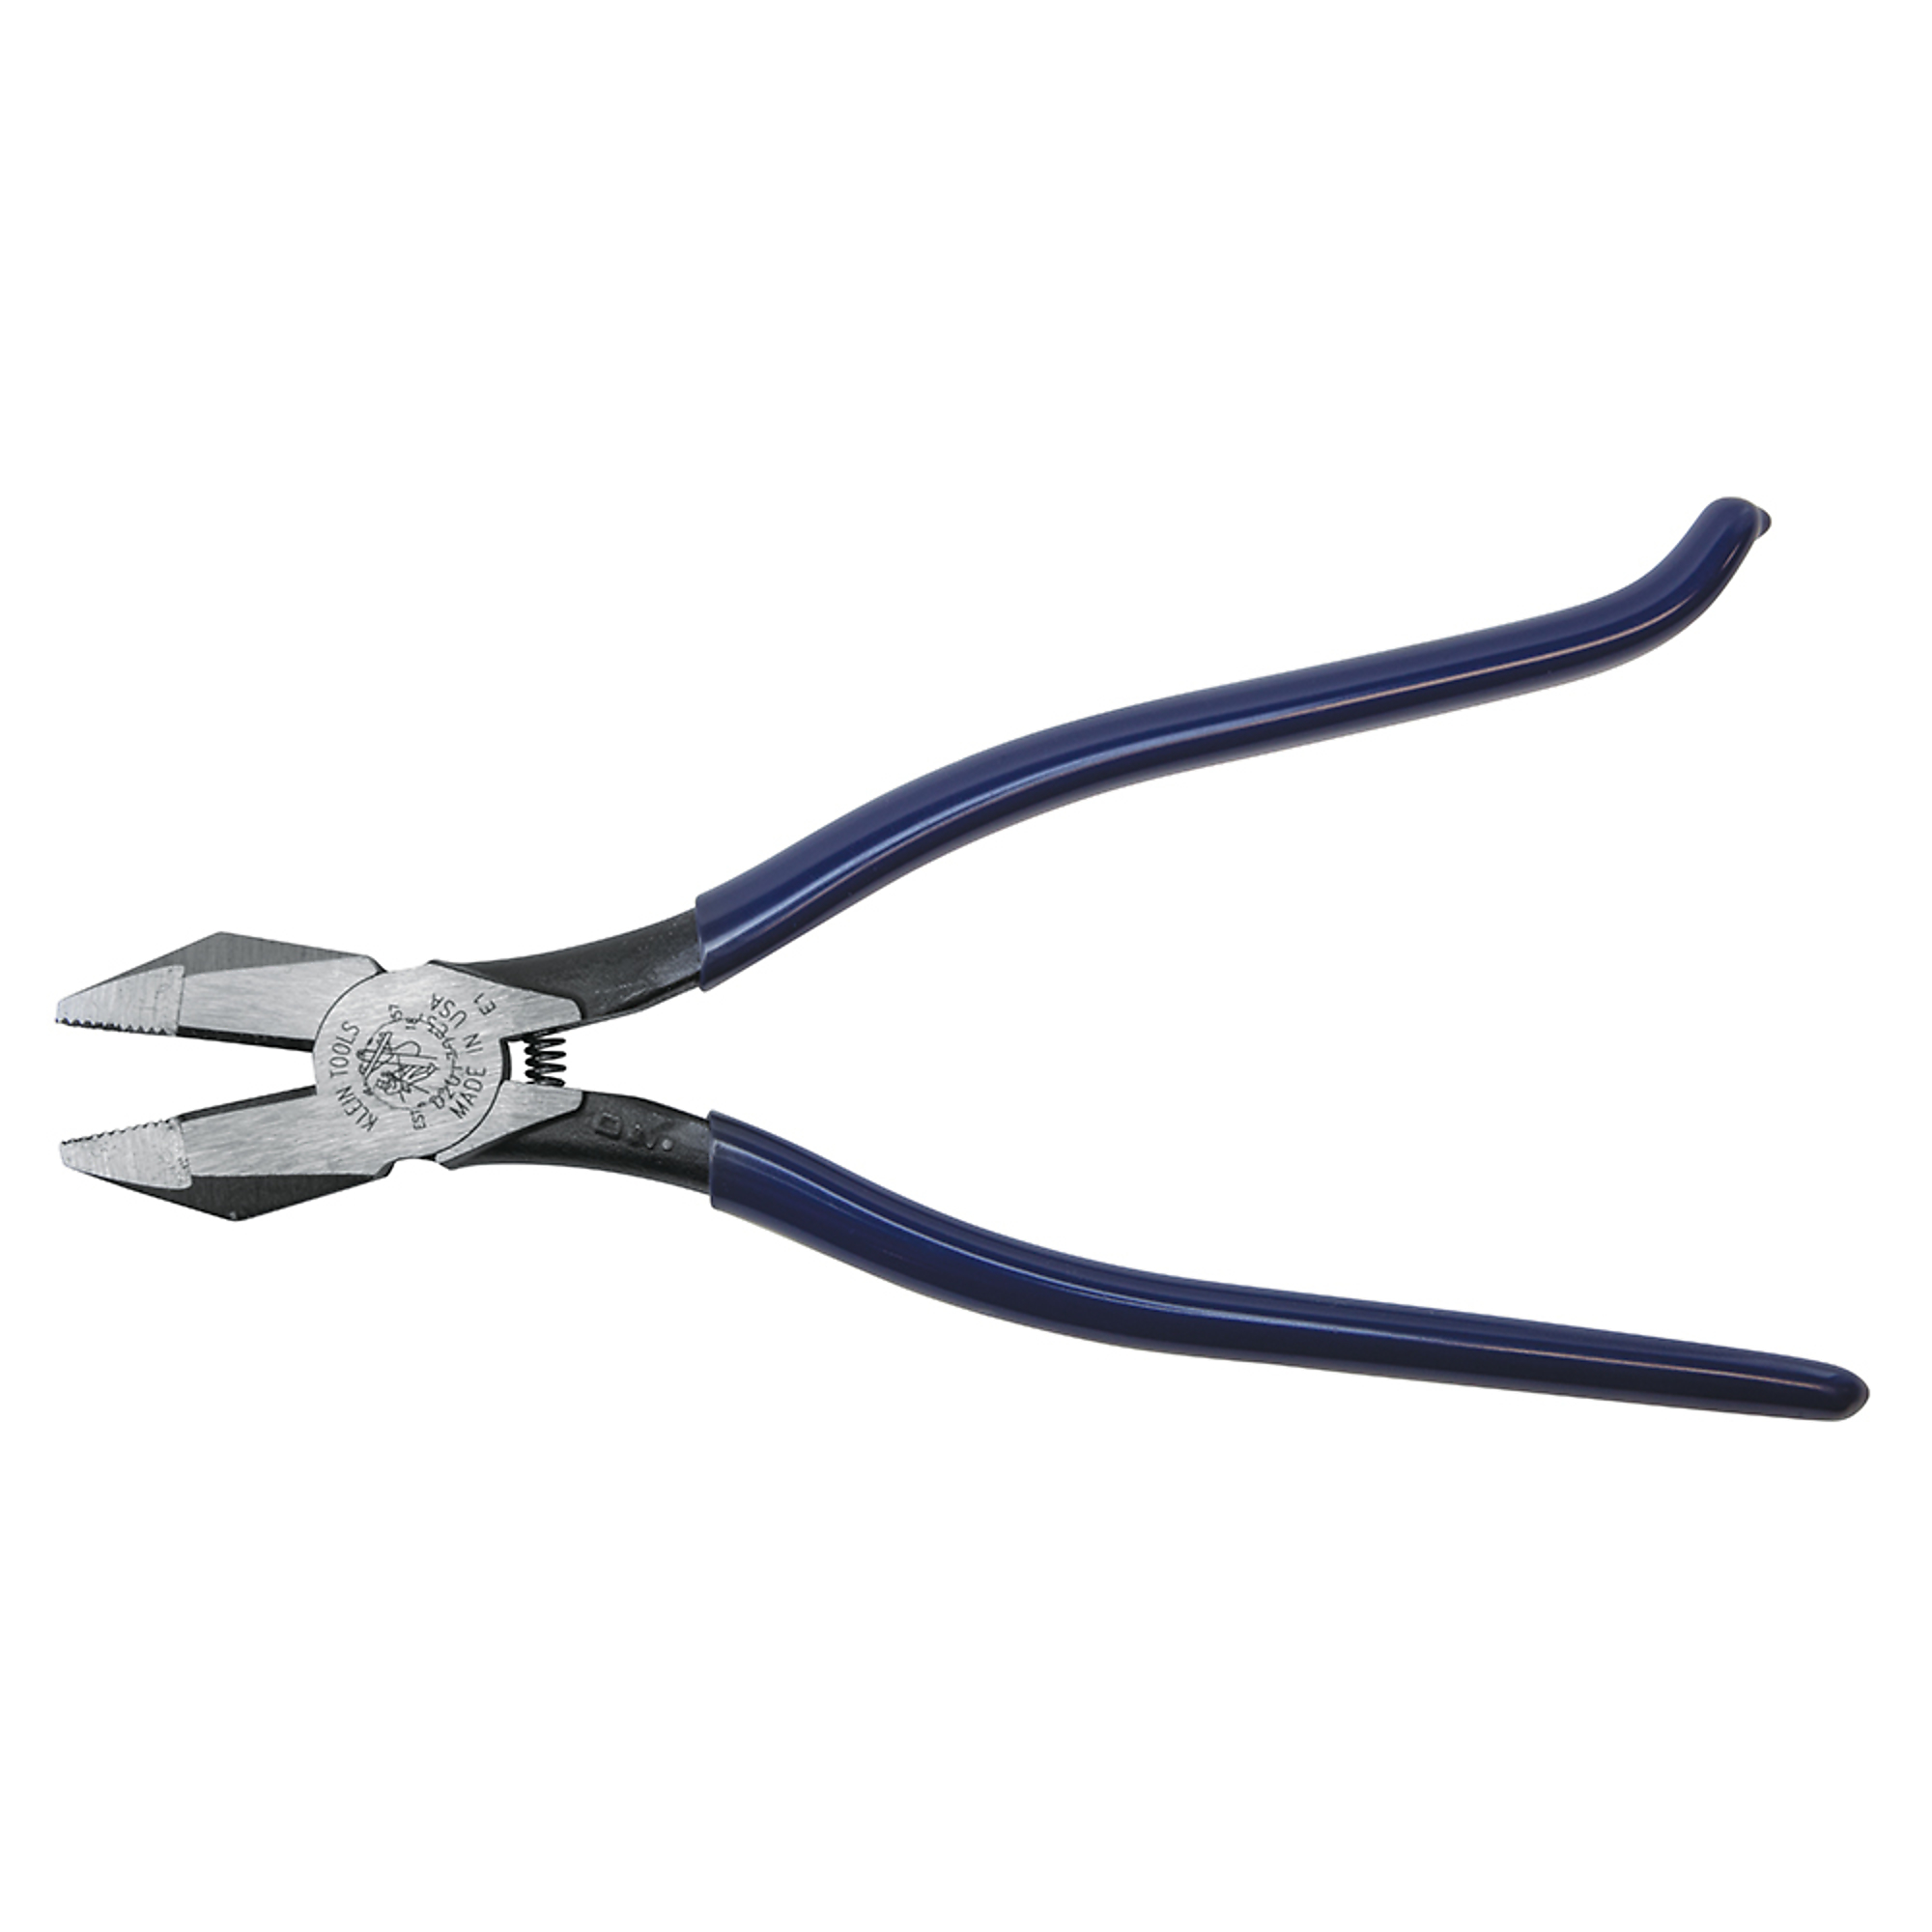 Klein Tools, Rebar Work Pliers Plastic Dipped, Pieces (qty.) 1 Material Steel, Jaw Capacity 1.16 in, Model D201-7CST